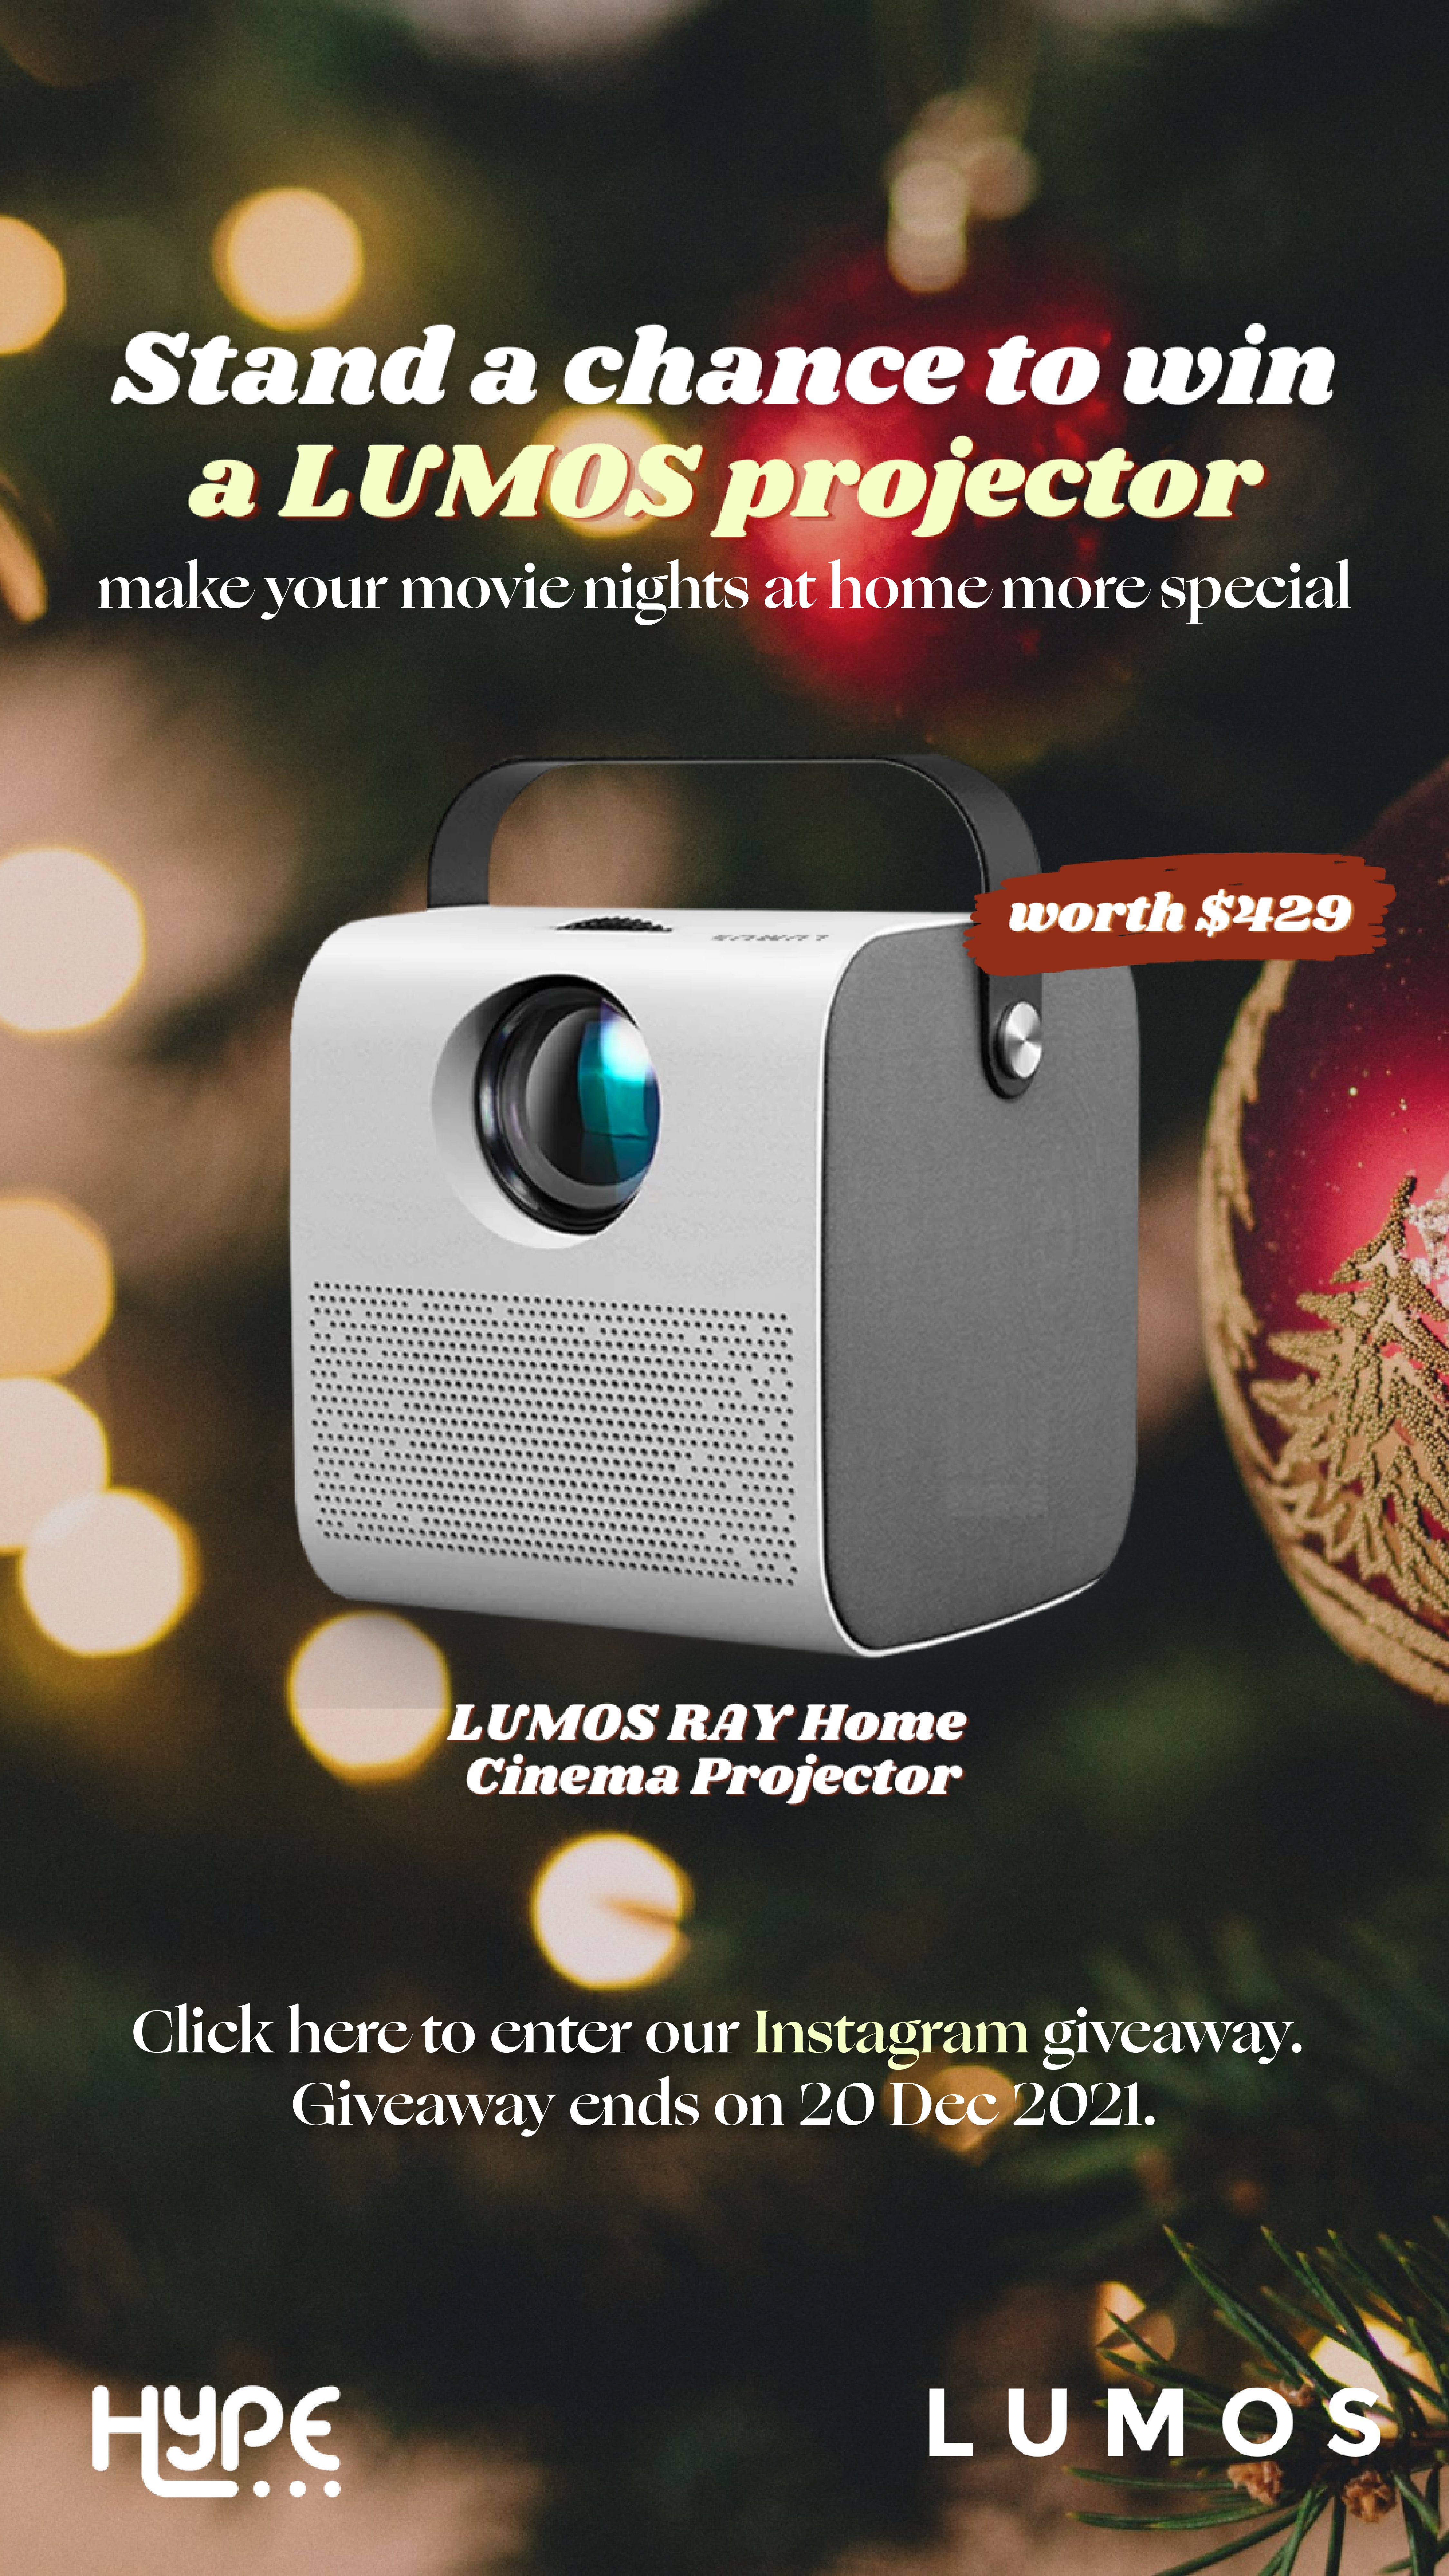 lumos-projector-home-ray-movie-nights-christmas-giveaway-sidebar